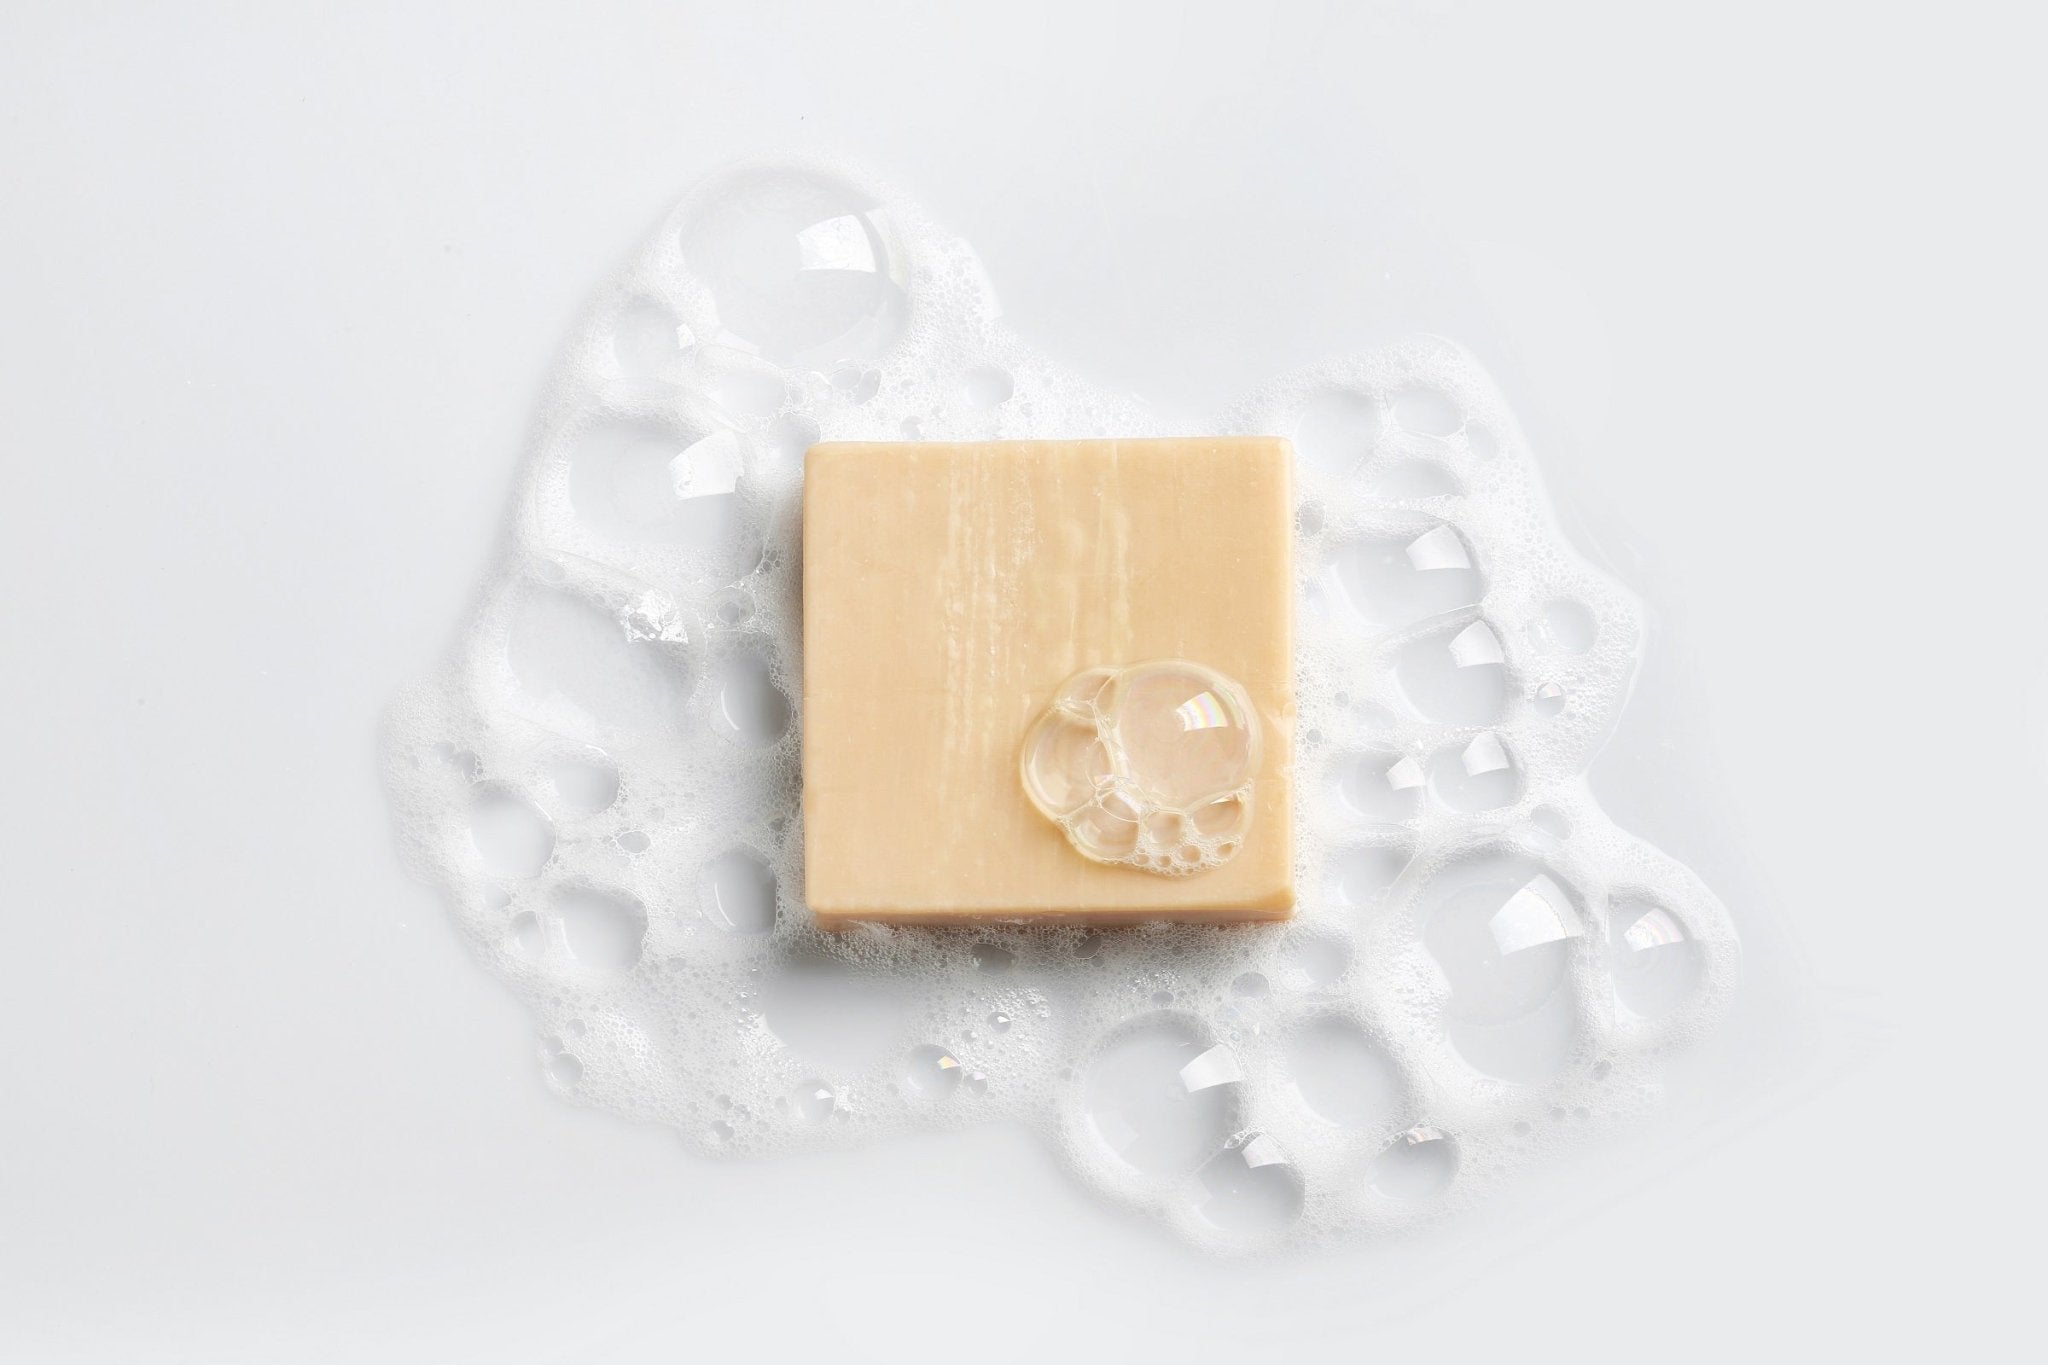 Benefits of Sudsing Up With CBD Bath Soaps - Tub Therapy